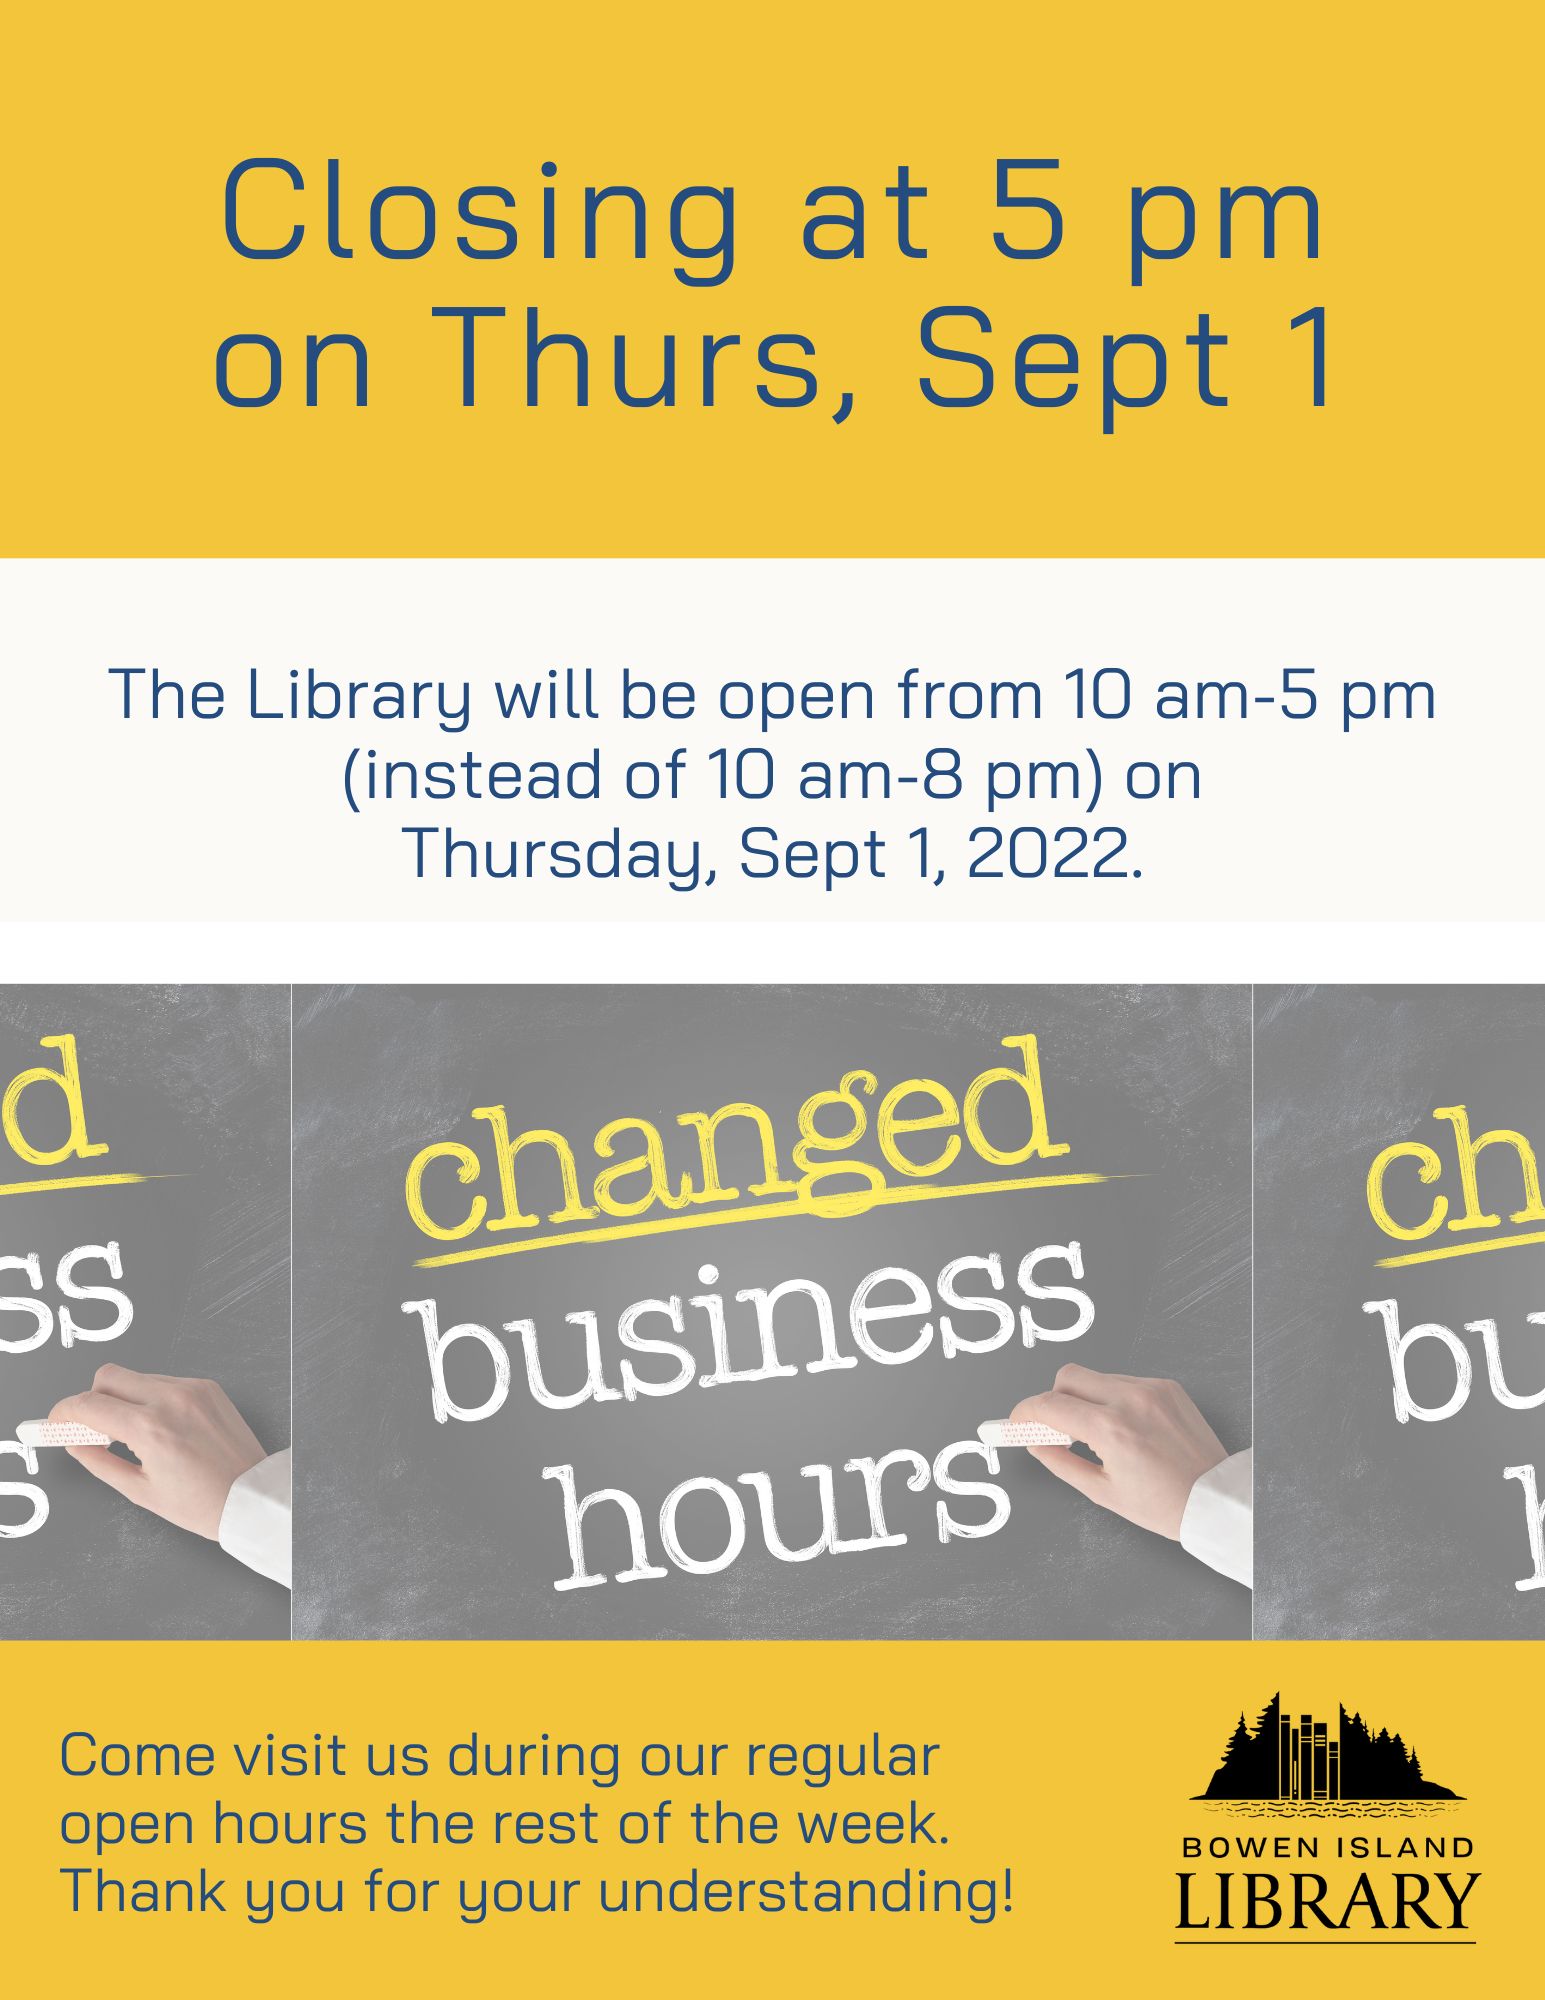 yellow poster with hand on chalkboard writing changed business hours, indicating the library is closing early on thursday, Sept 1, at 5 pm instaed of 8 pm